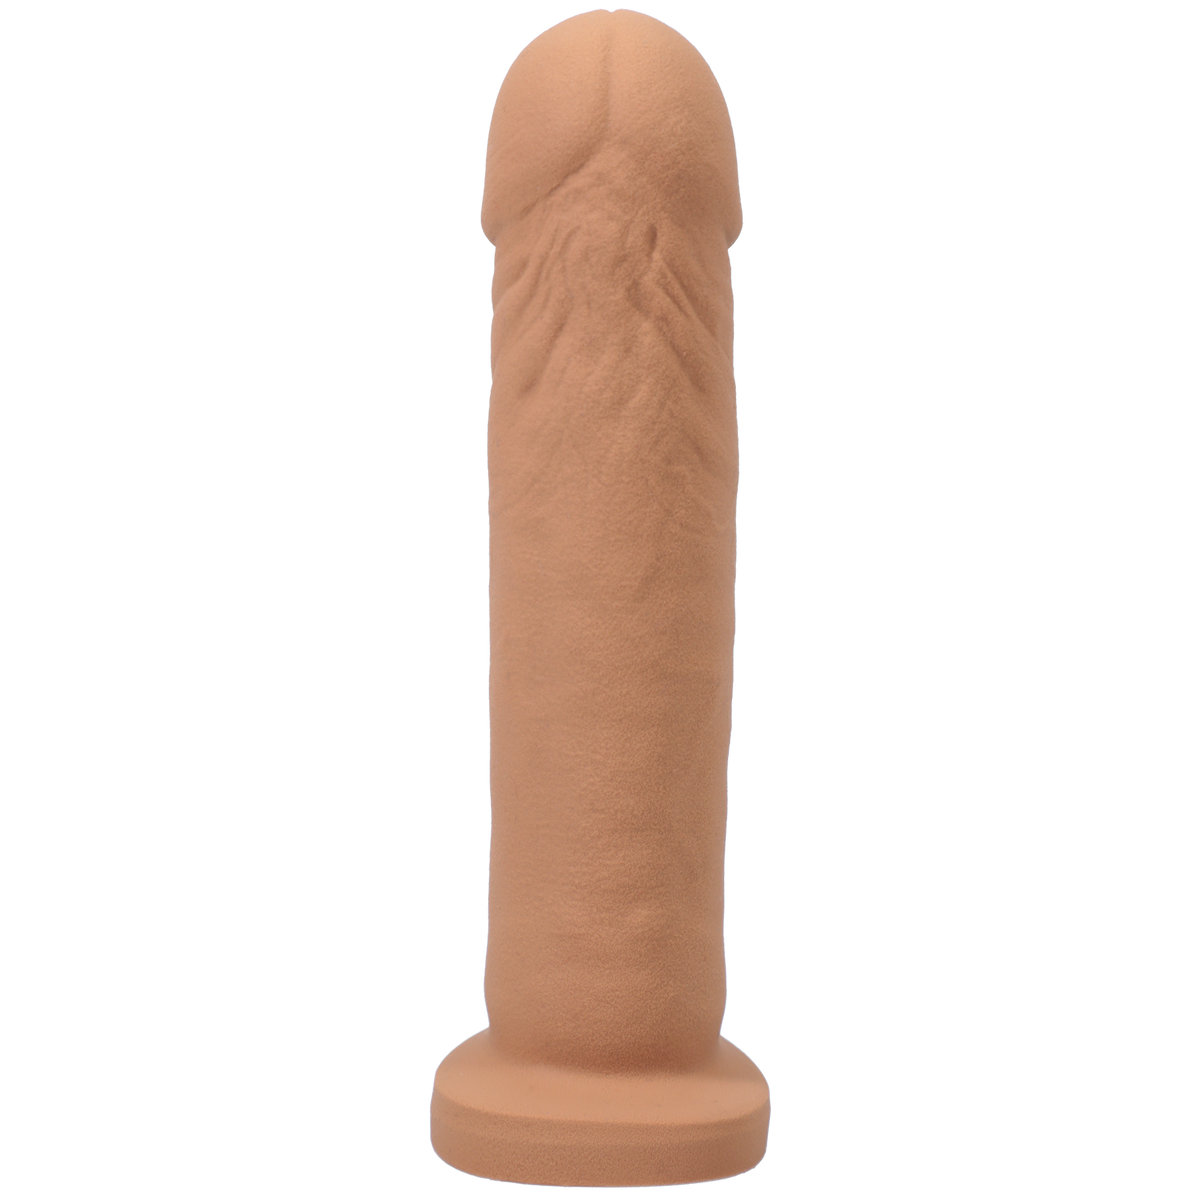 Tantus Silicone Alan O2 Dildo Vibrating Kit with Suction Cup